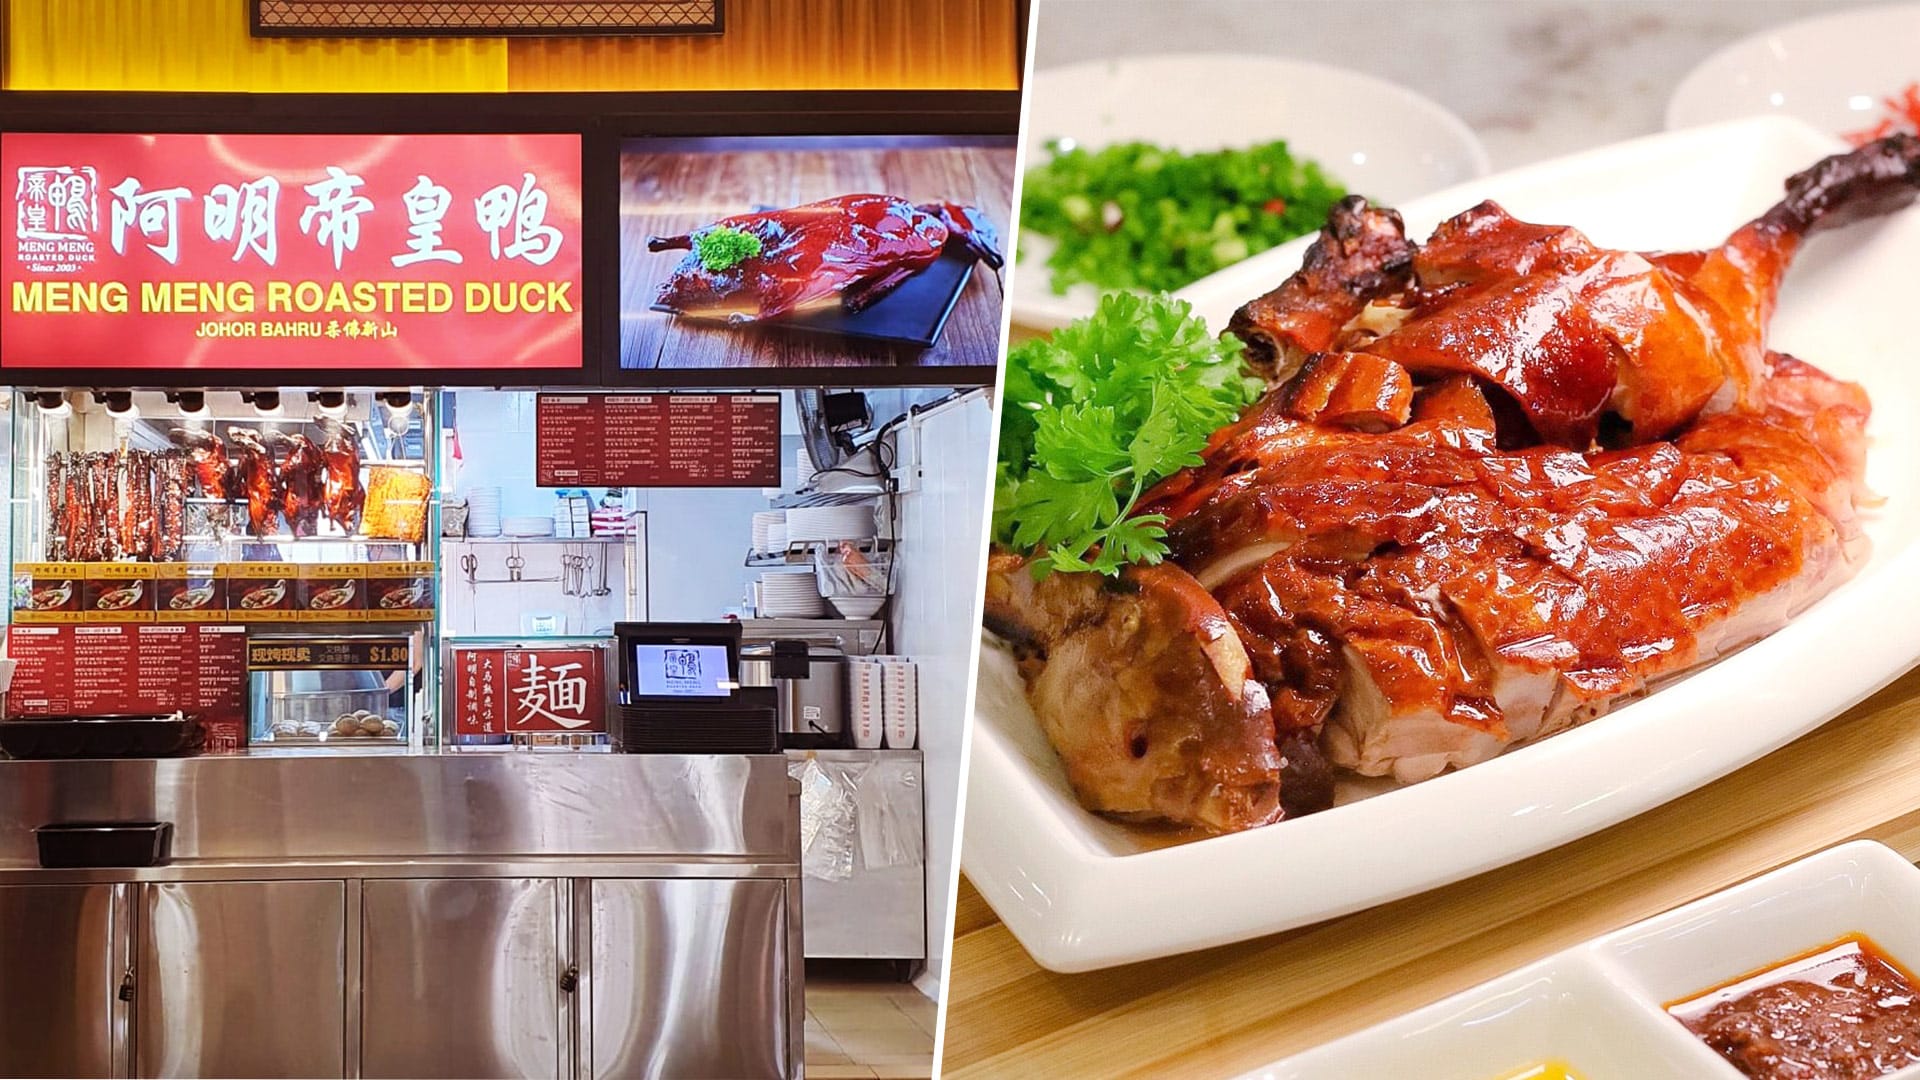 Popular JB Charcoal-Roasted Duck Joint Meng Meng Opens Hawker Stall In S’pore